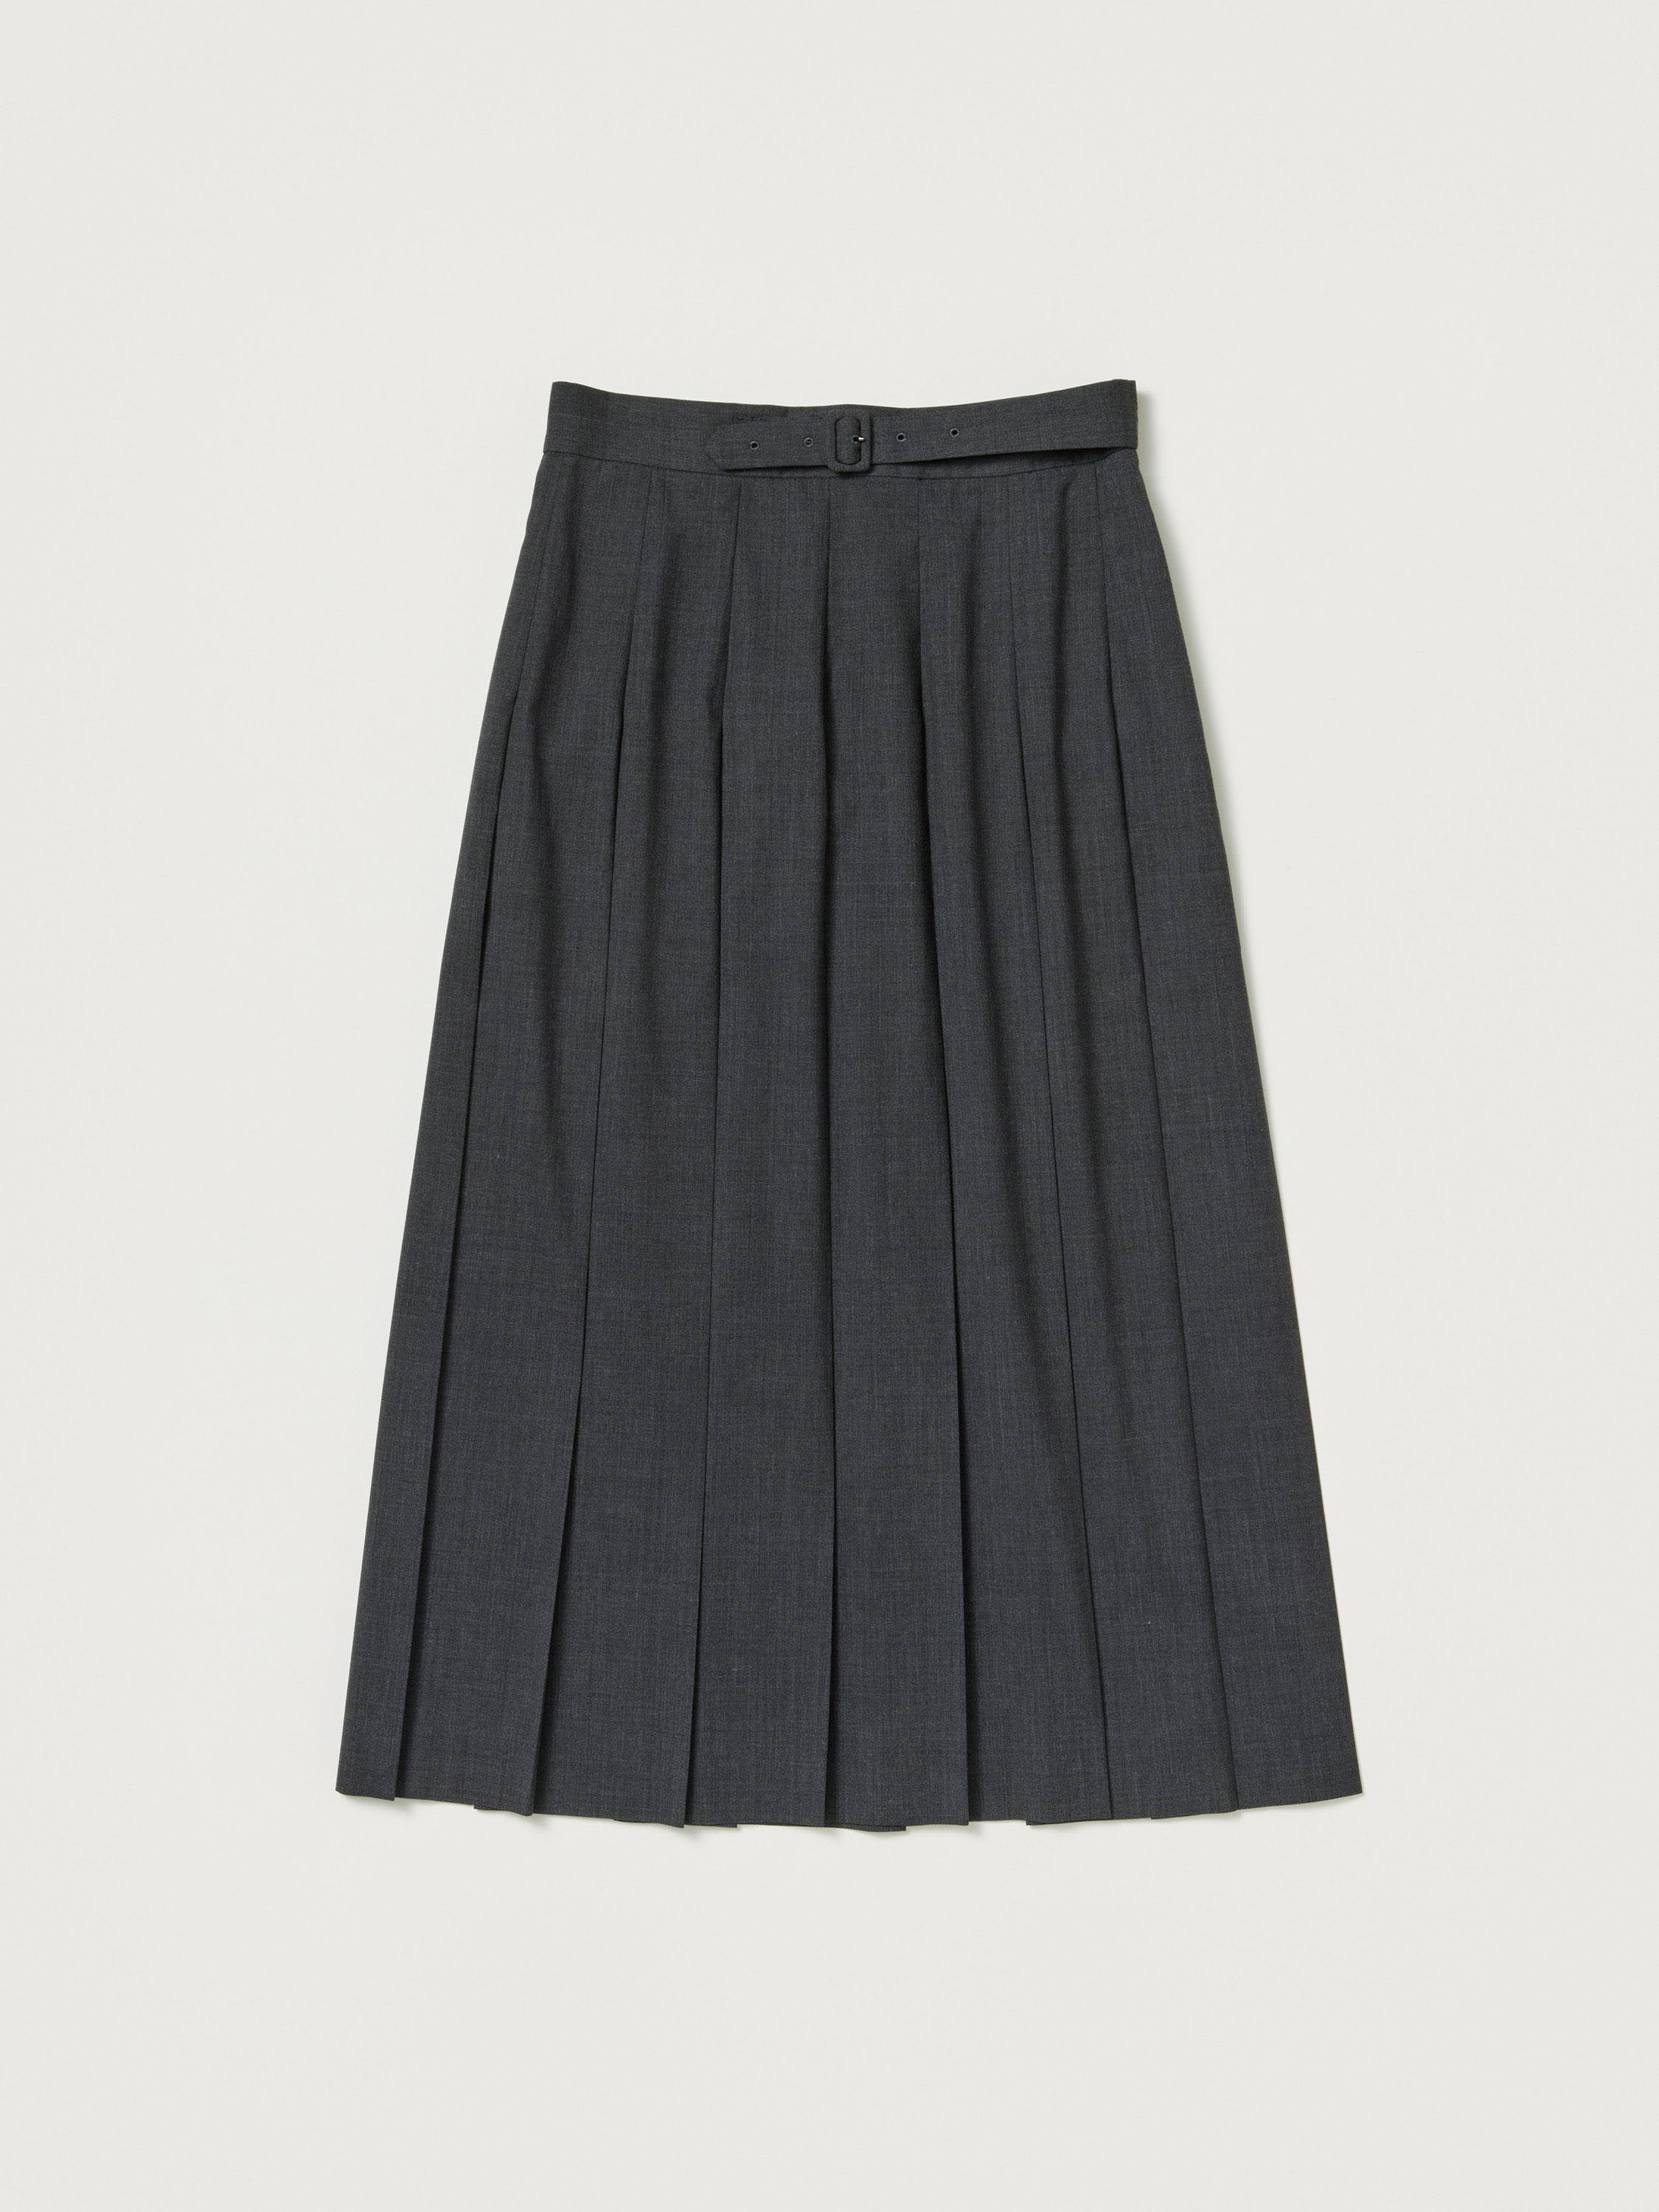 SUPER FINE TROPICAL WOOL PLEATED SKIRT 詳細画像 TOP CHARCOAL 1